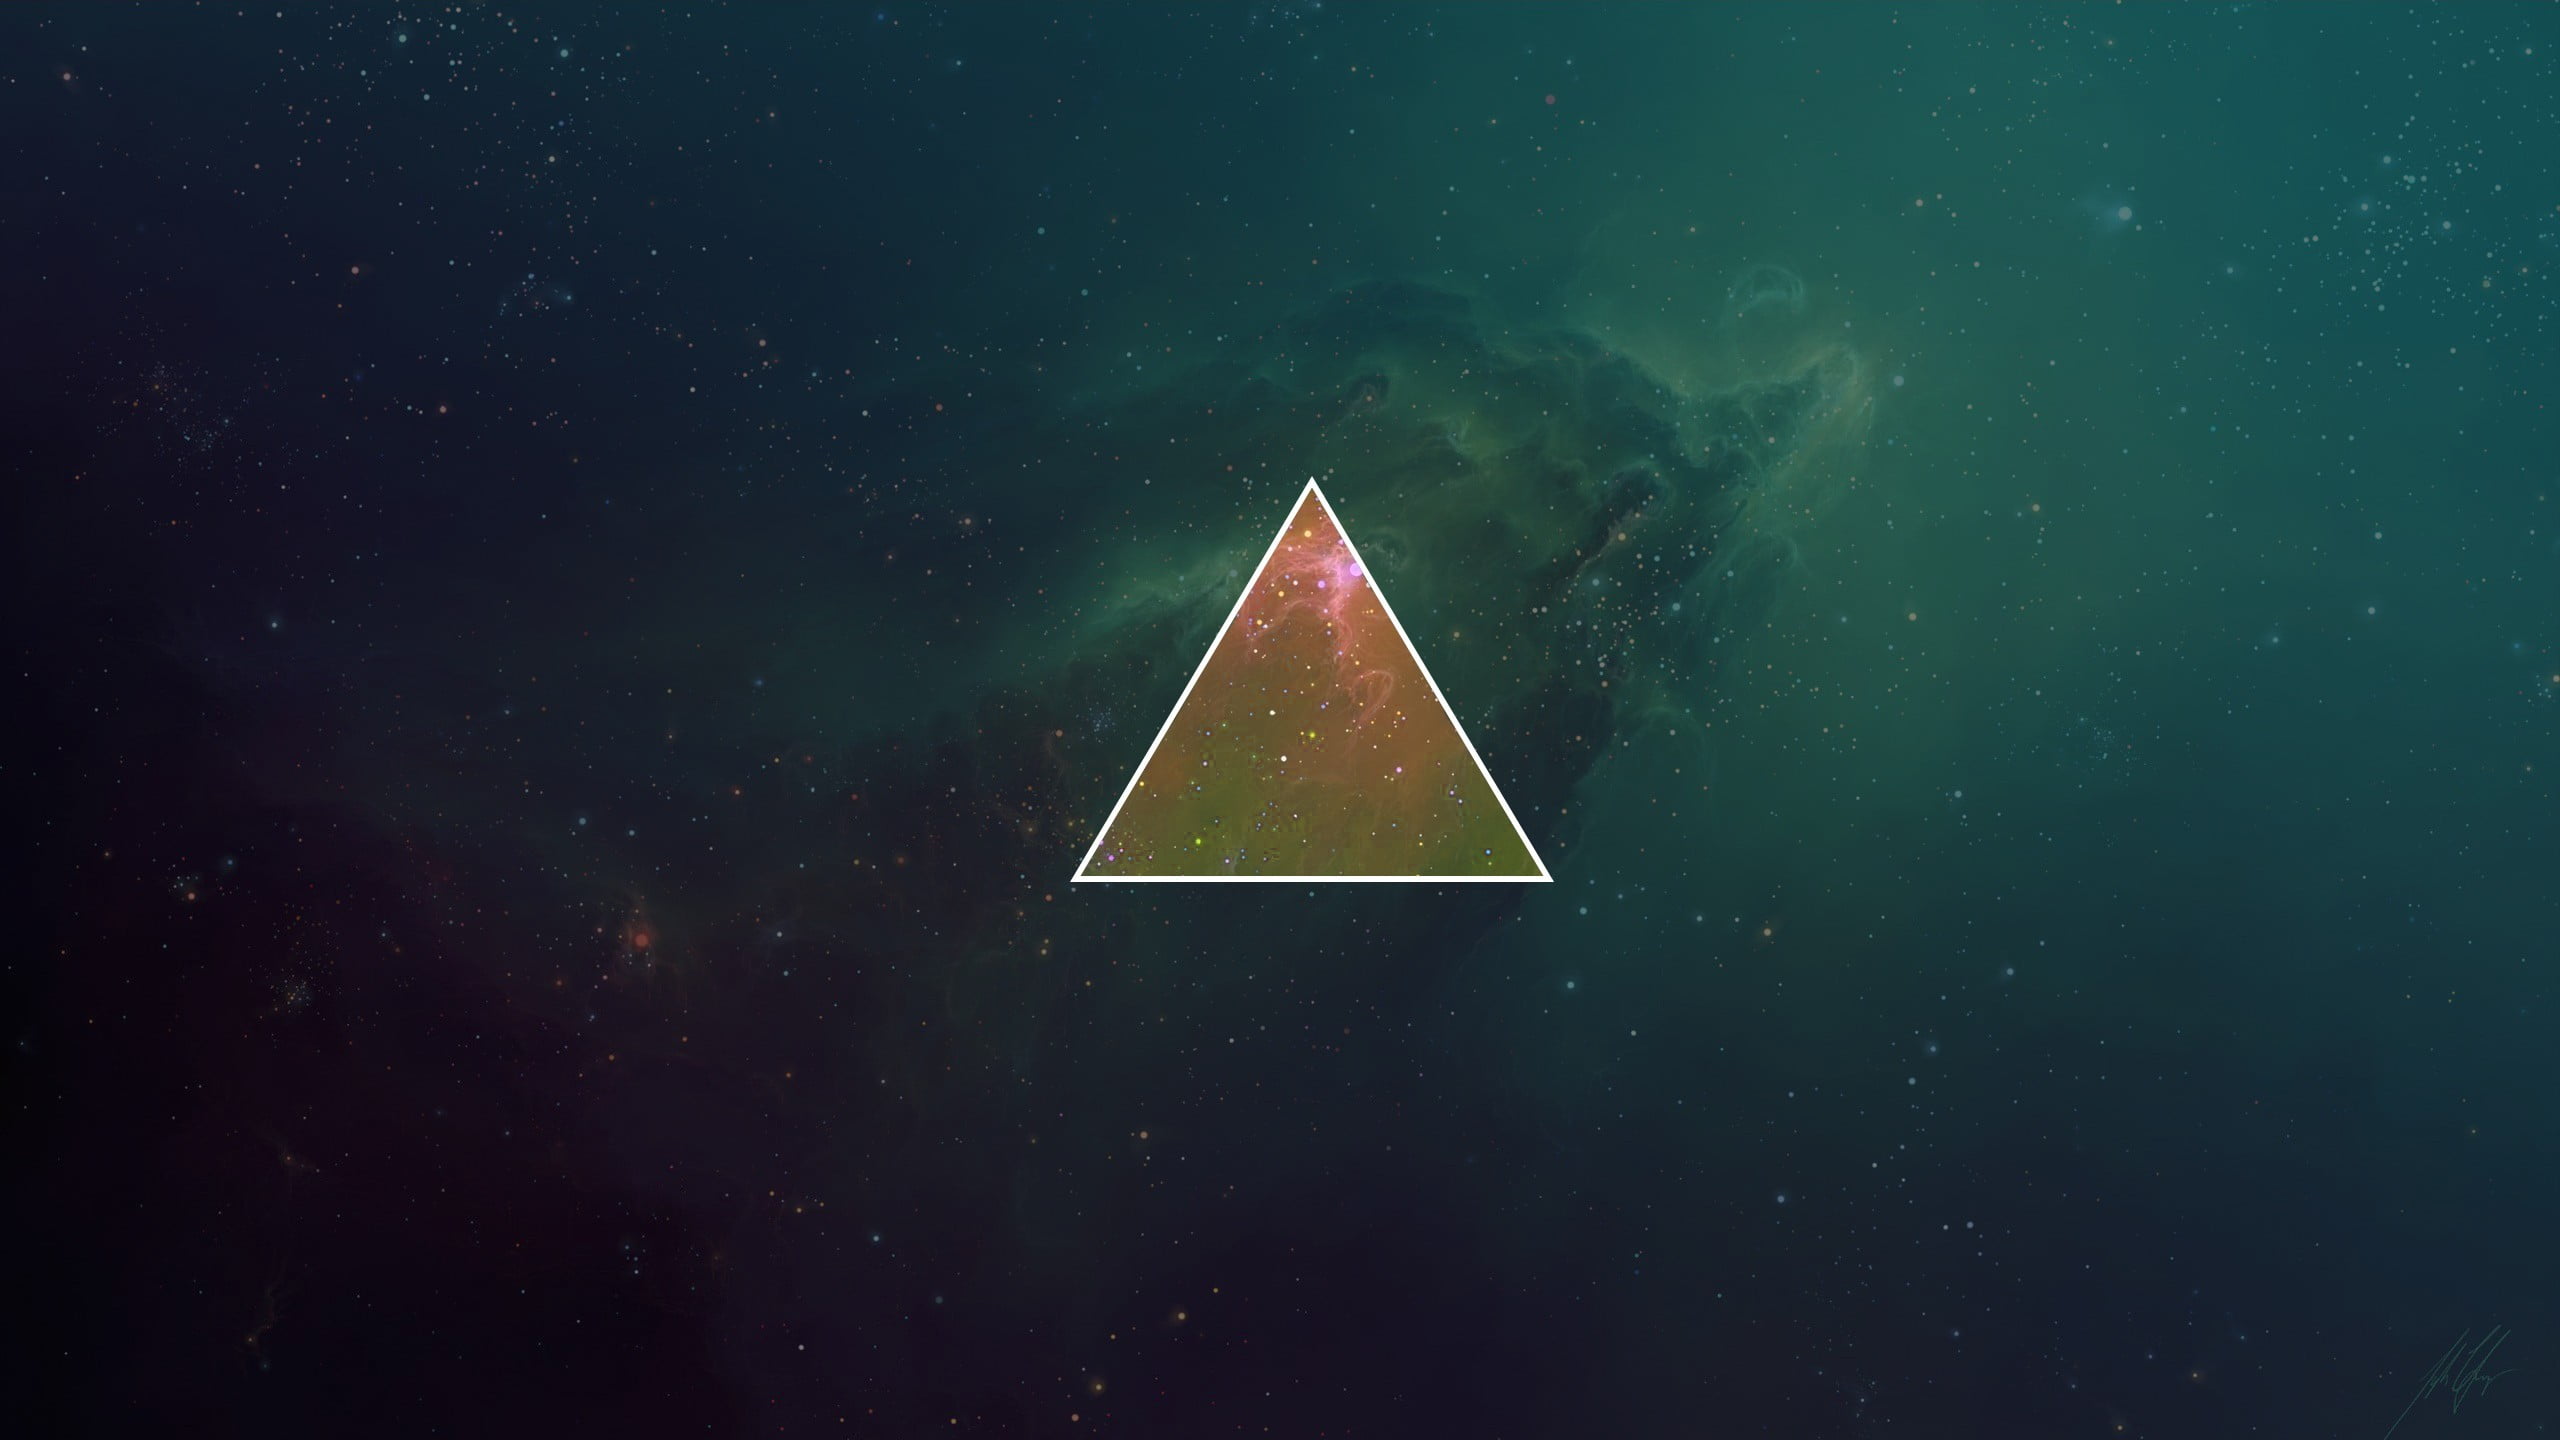 Pink Floyd Darkside of the Moon logo, space, triangle, galaxy